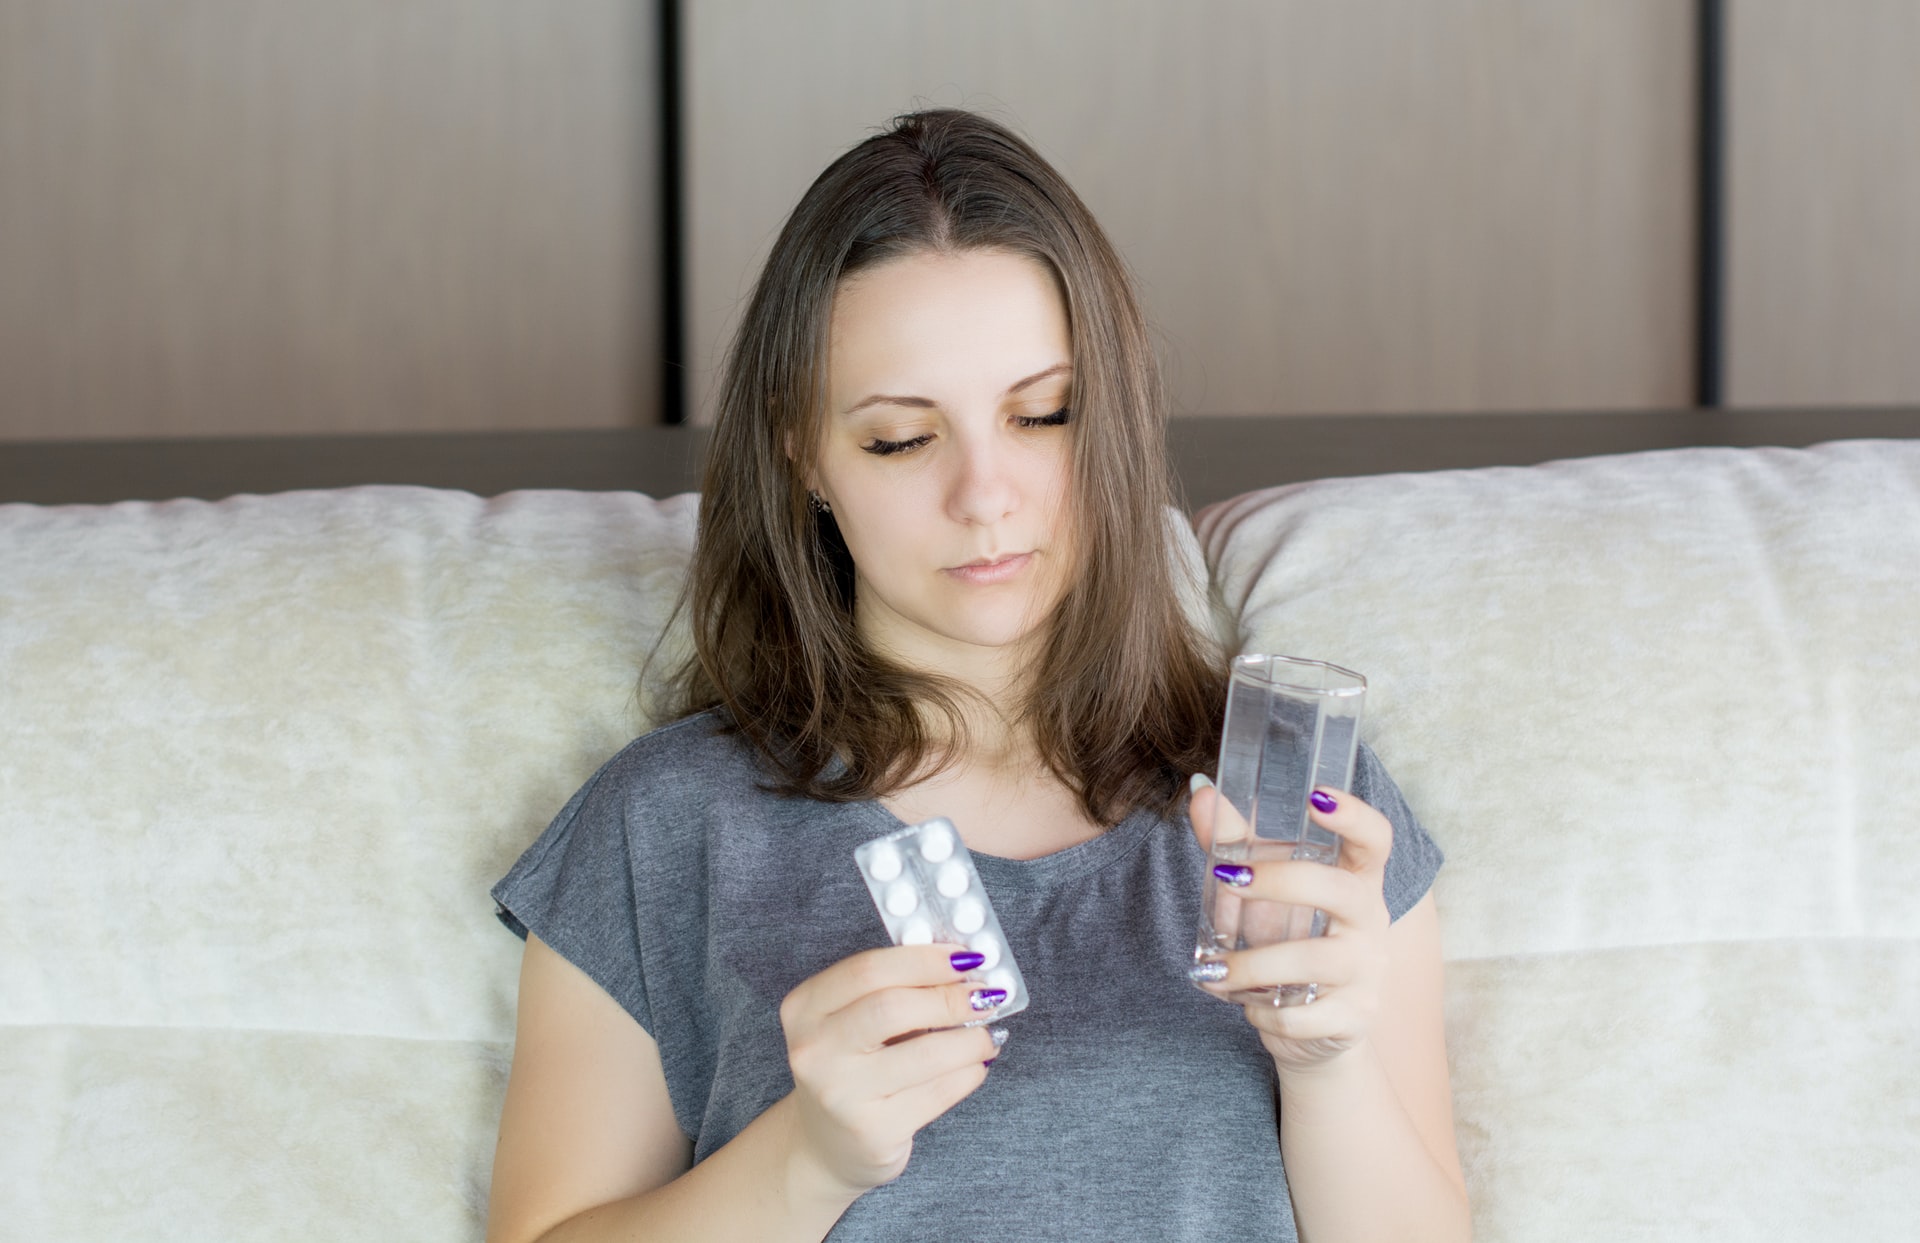 person resting on bed, holding a glass of water in one hand and strip of vitamins in the other